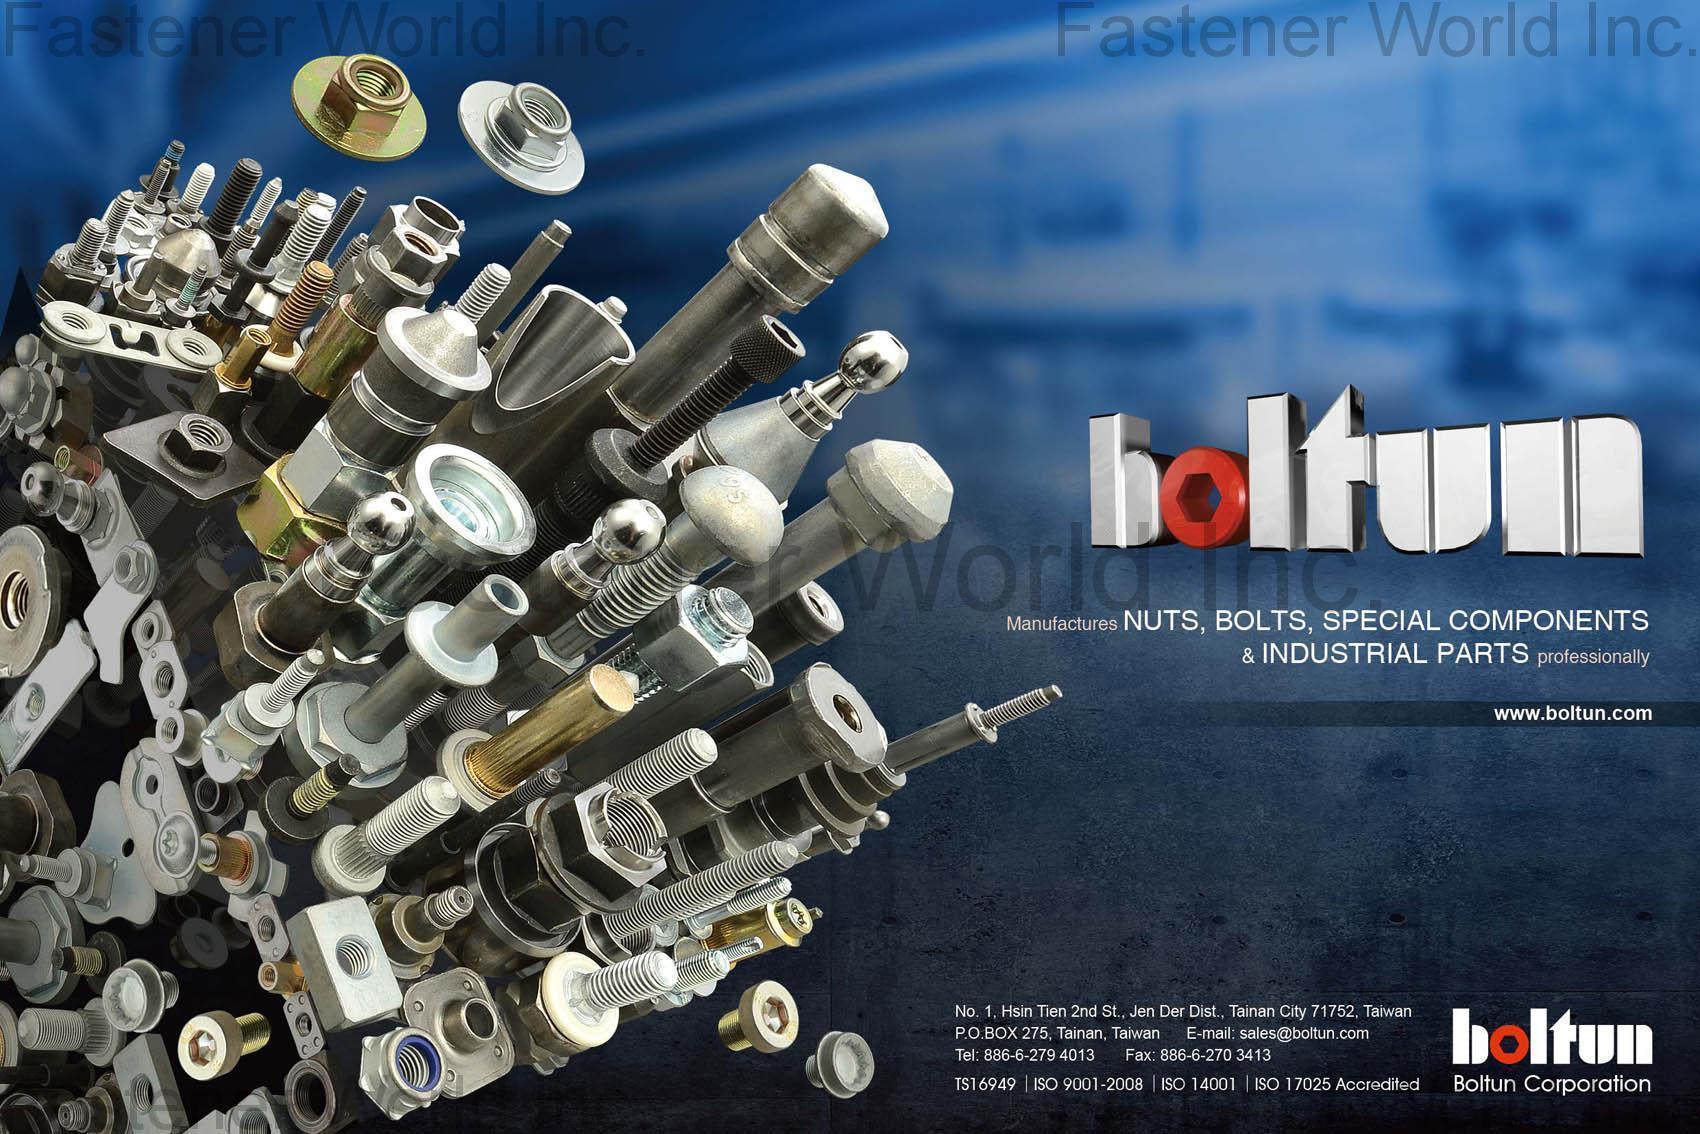 BOLTUN CORPORATION  , Welding Nuts,Rivet Nuts,Clinch Nuts,Locking Nuts,Nylon Insert Nuts,Conical Washer Nuts,T-Nuts,CNC Machining Parts,Stamping Parts,Bushed & Sleeves,Assembly Components,Special Parts,HEX. Bolt & Screw,Flange Bolt,Socket,Sems,Screw With Welding Projection,Screw With Welding Ring & Points,Clinch Bolt,T C Bolt,Special Pin,Wheel Bolt,Rail Bolt,Rail Bolts Construction Fasteners: Nuts, Screws & Washers,Wind Turbine Fasteners Kits: Nuts, Bolts & Washers Truck Wheel Bolts,Bolts & Nuts & Components,Motorcycle parts,Nylon rings & special washer,Expansion Bolt , Non-standard mechanical parts